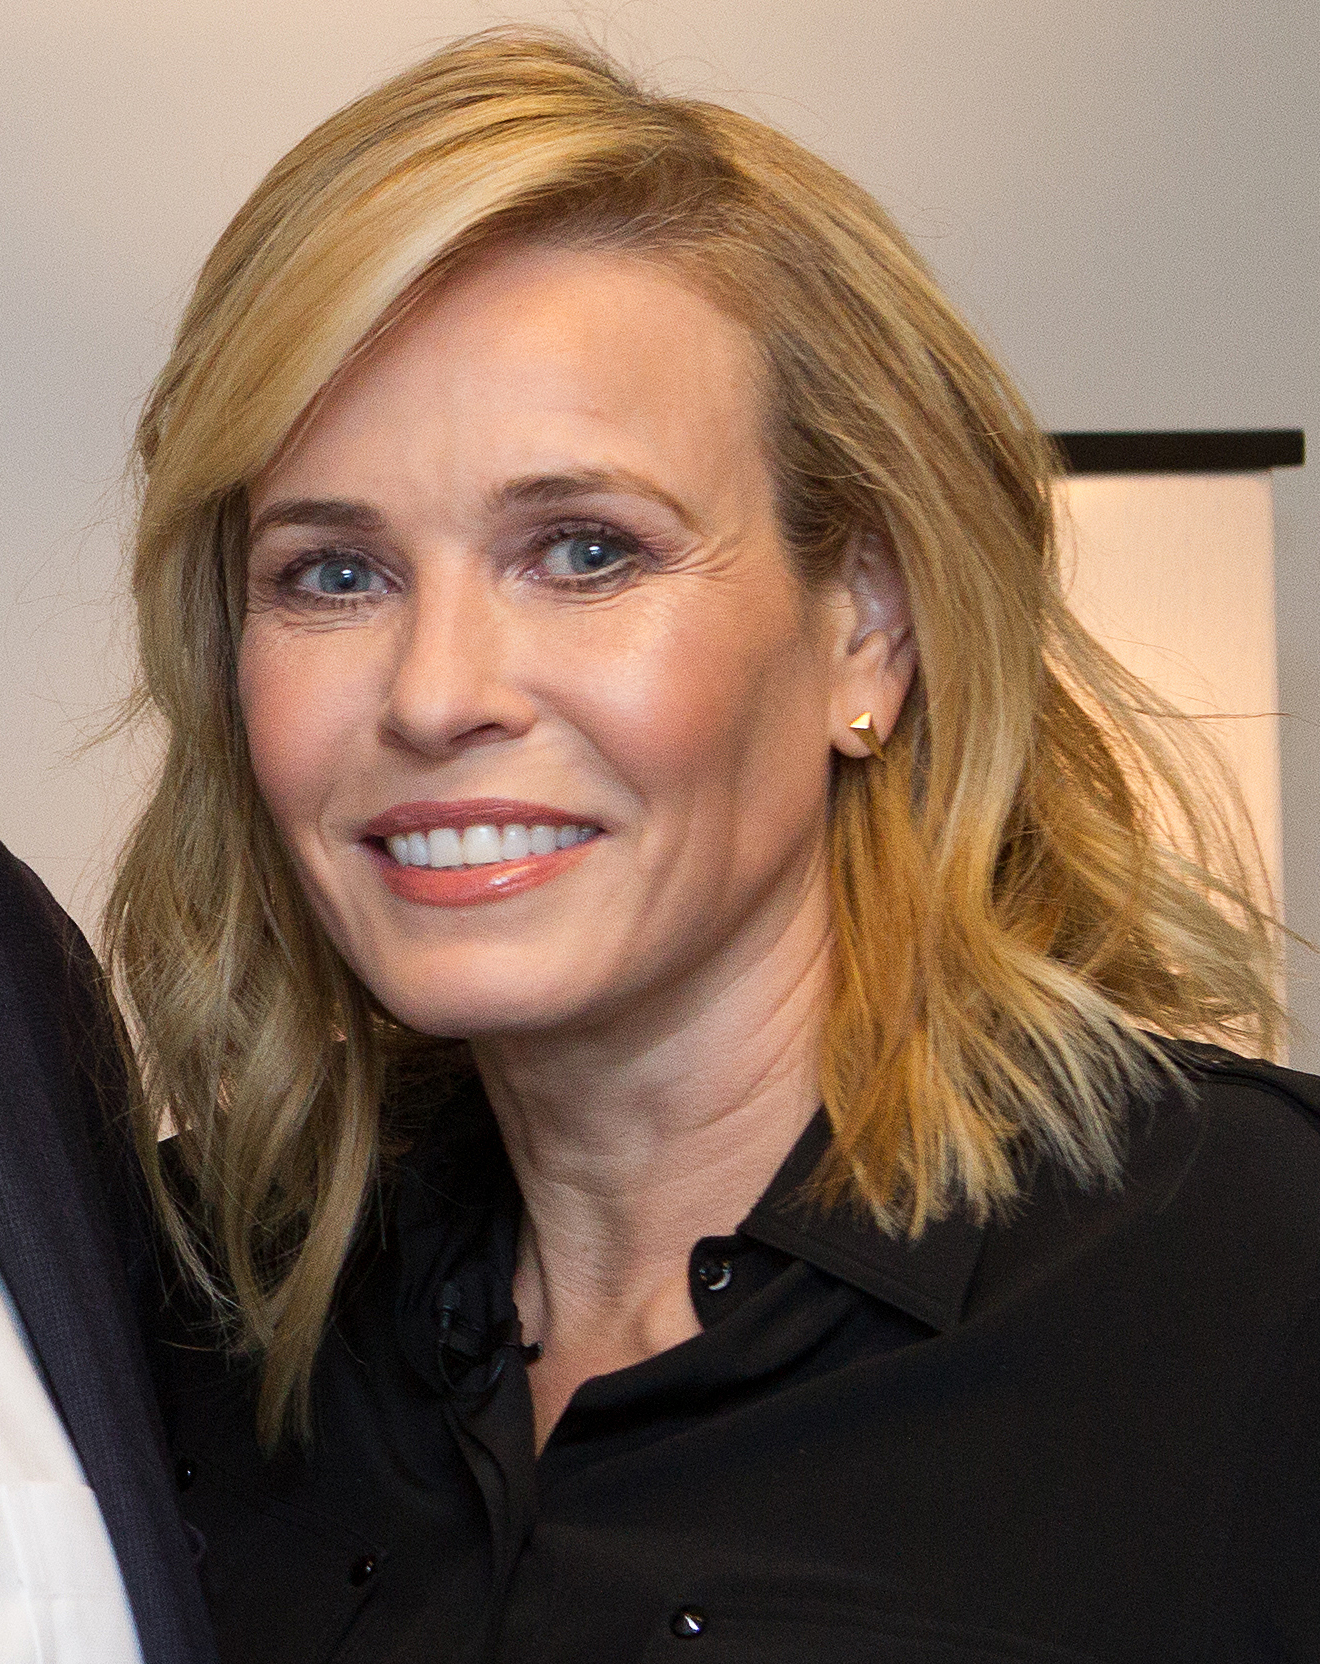 Chelsea Handler is not one of the comedians like Jo Koy on this list, but we had to add her!